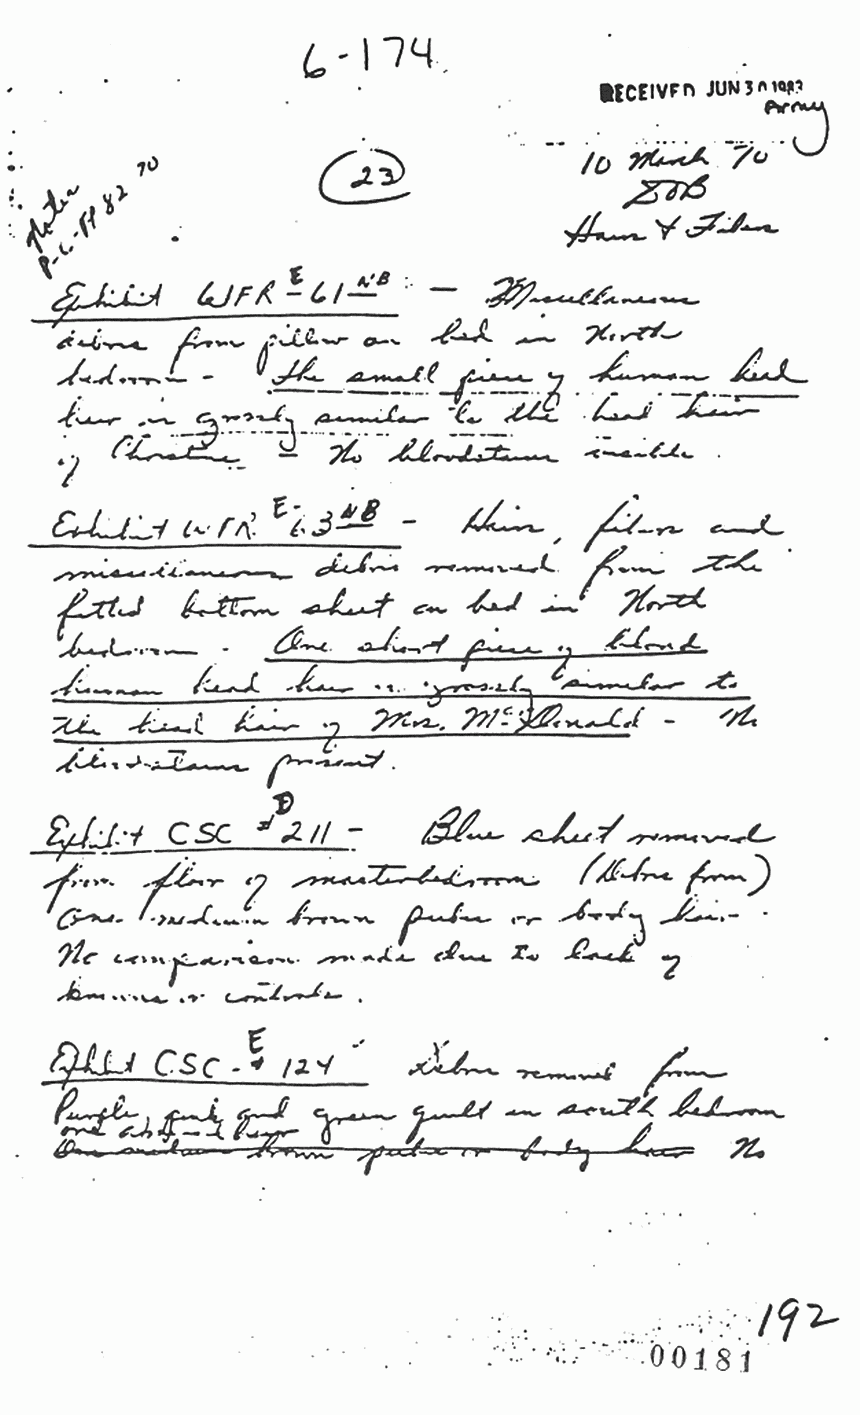 March 10, 1970: Notes of Dillard Browning (CID), p. 2 of 3